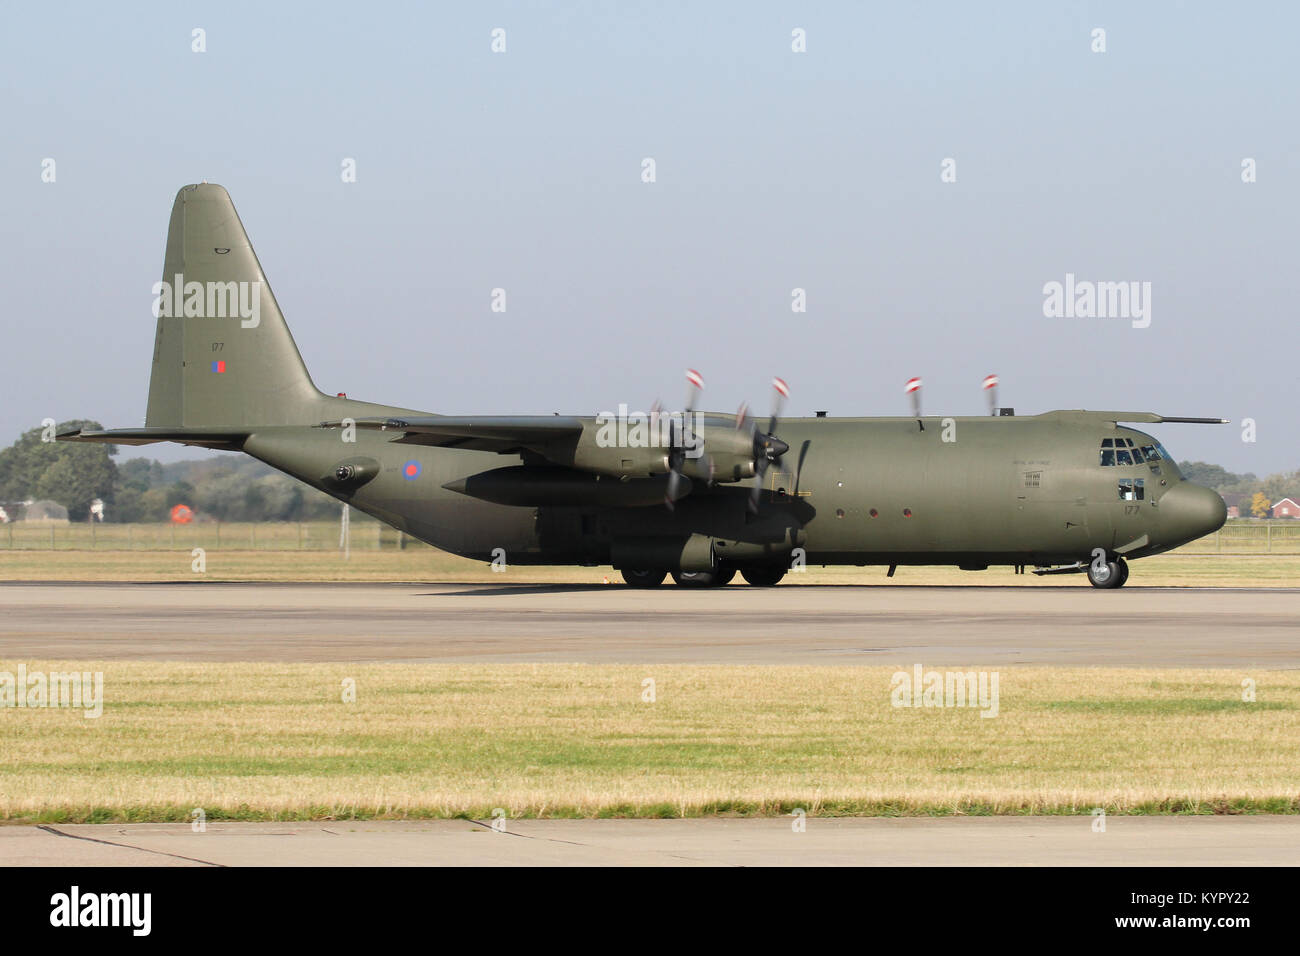 RAF C-130K Hercules C3 taxiing out after landing at Coningsby on a bright summers day. Stock Photo